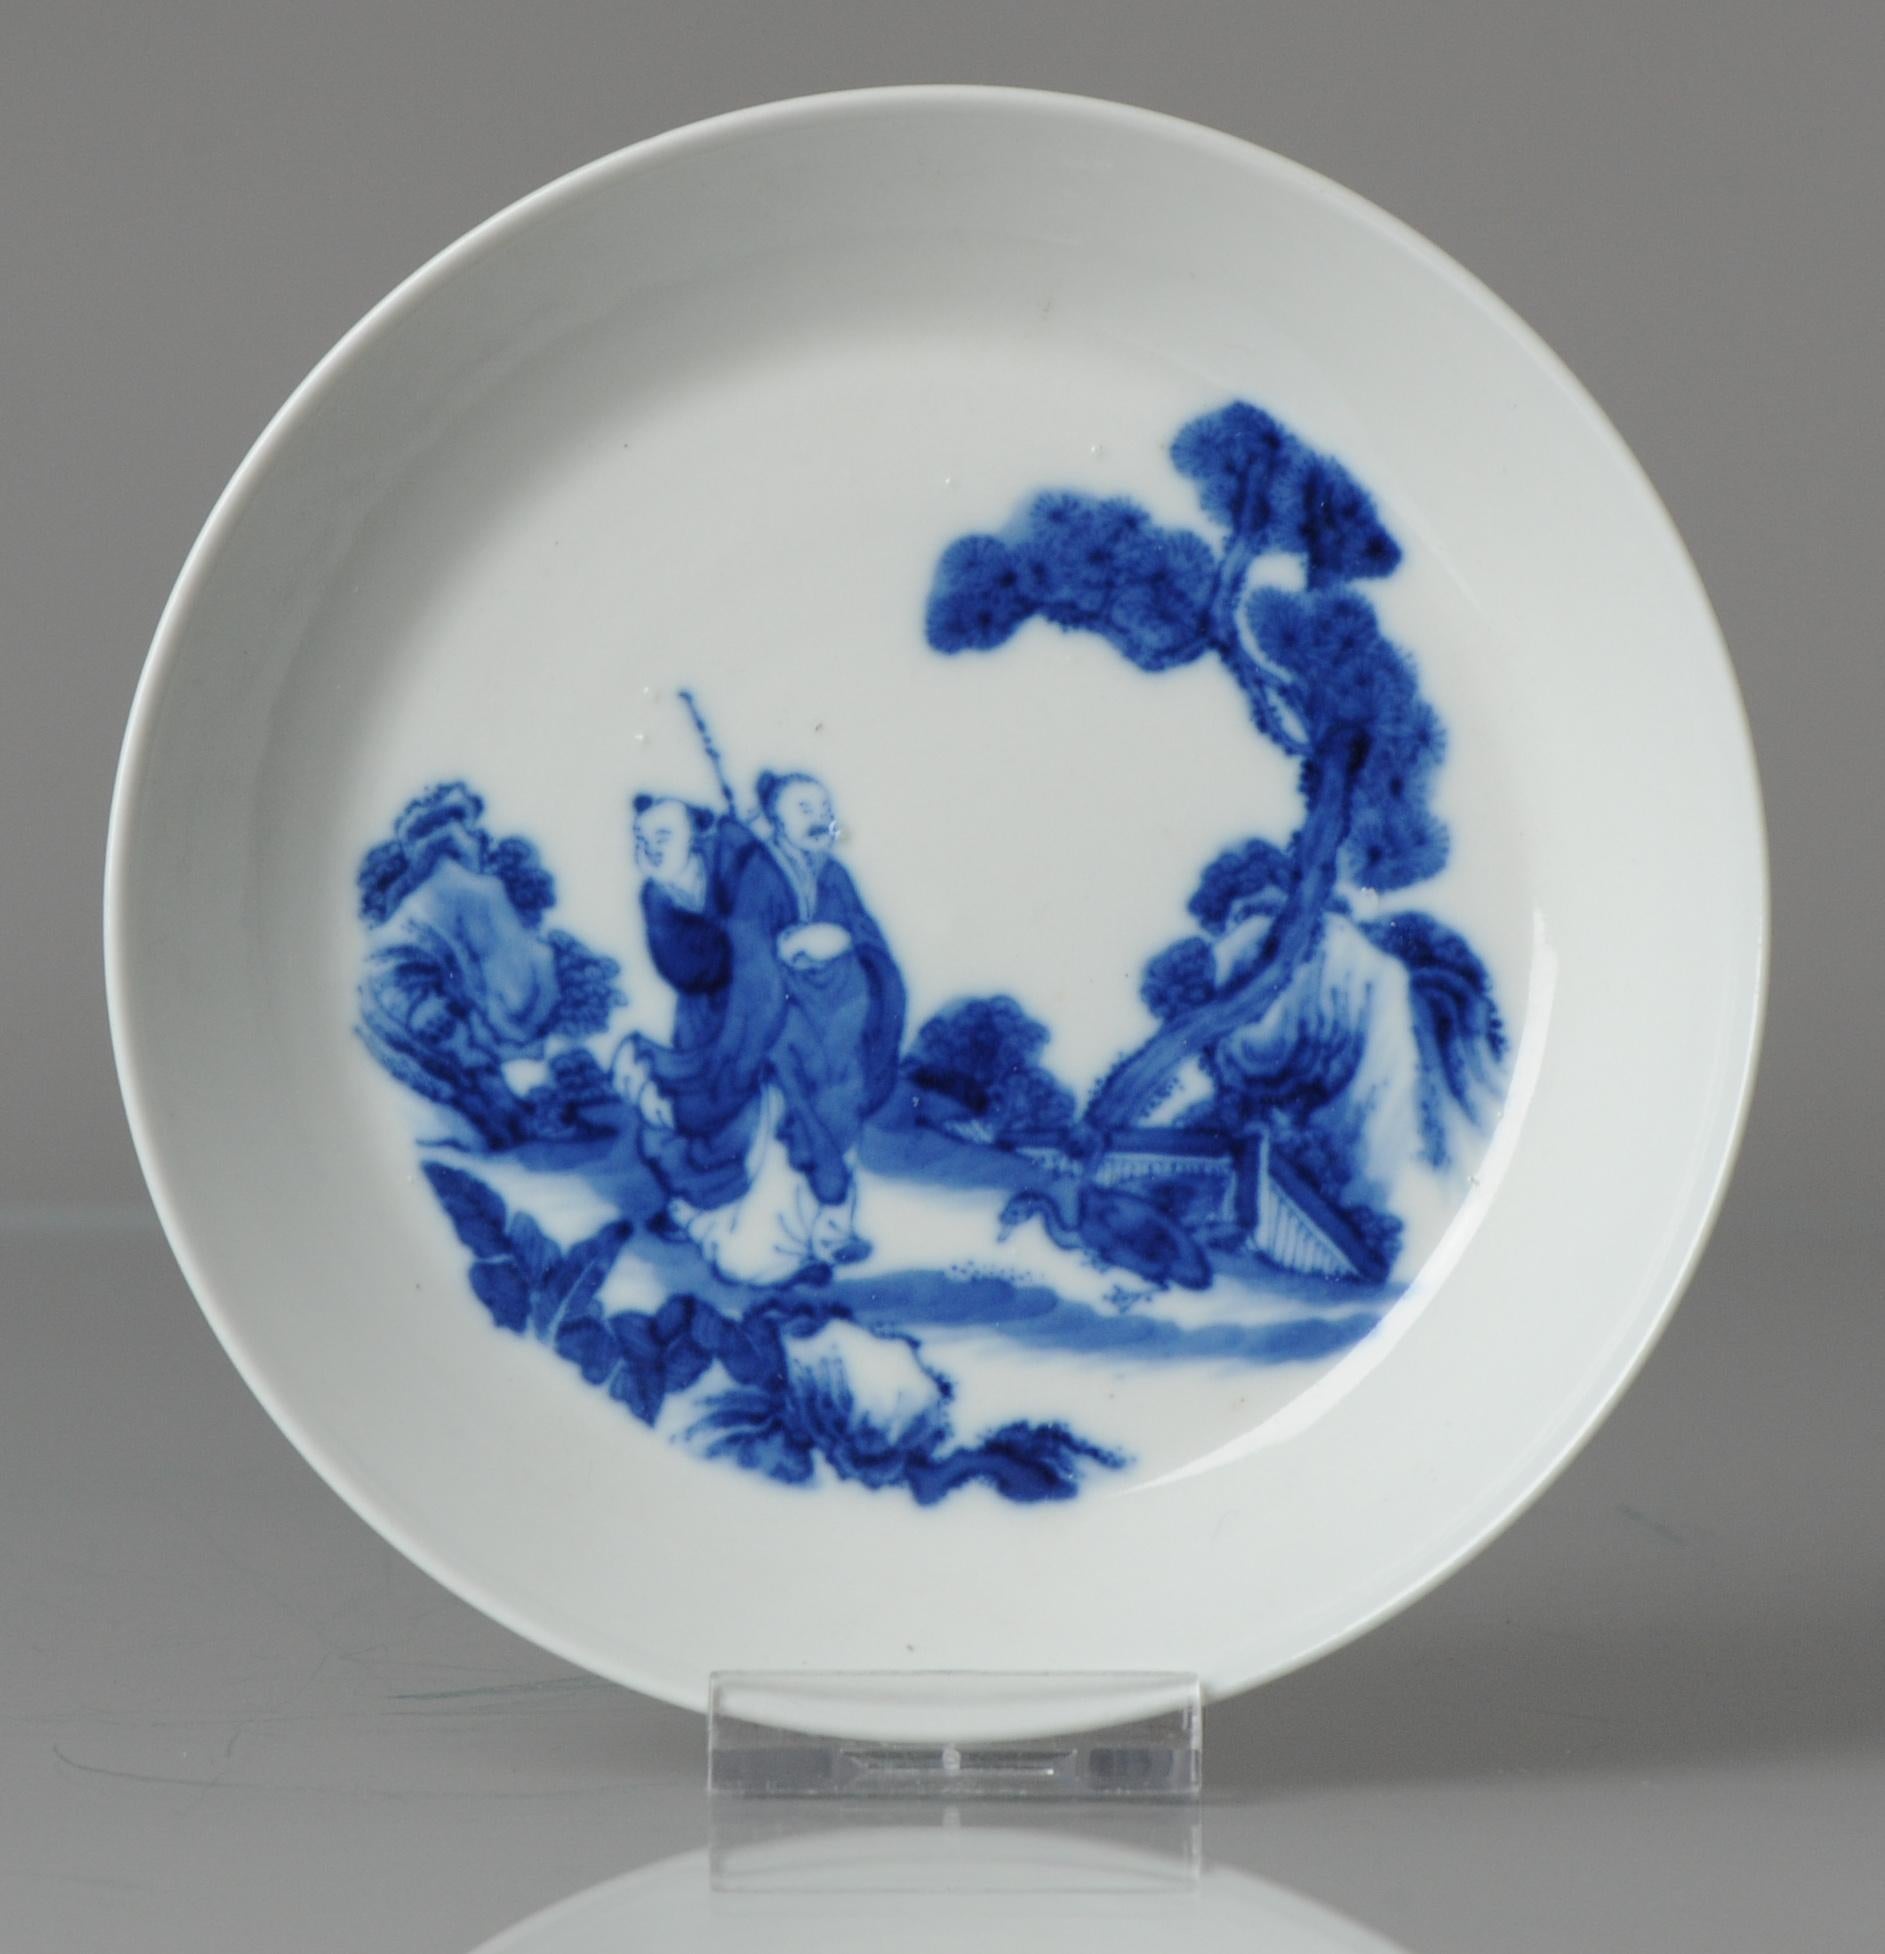 A top quality Chinese porcelain dish/brush washer with, Qing Dynasty
Of shallow conical form with pronounced foot ring, painted with a scene of Wang Xizhi and a boy contemplating a goose on a village path.
Measure: 14cm diameter.

This plate